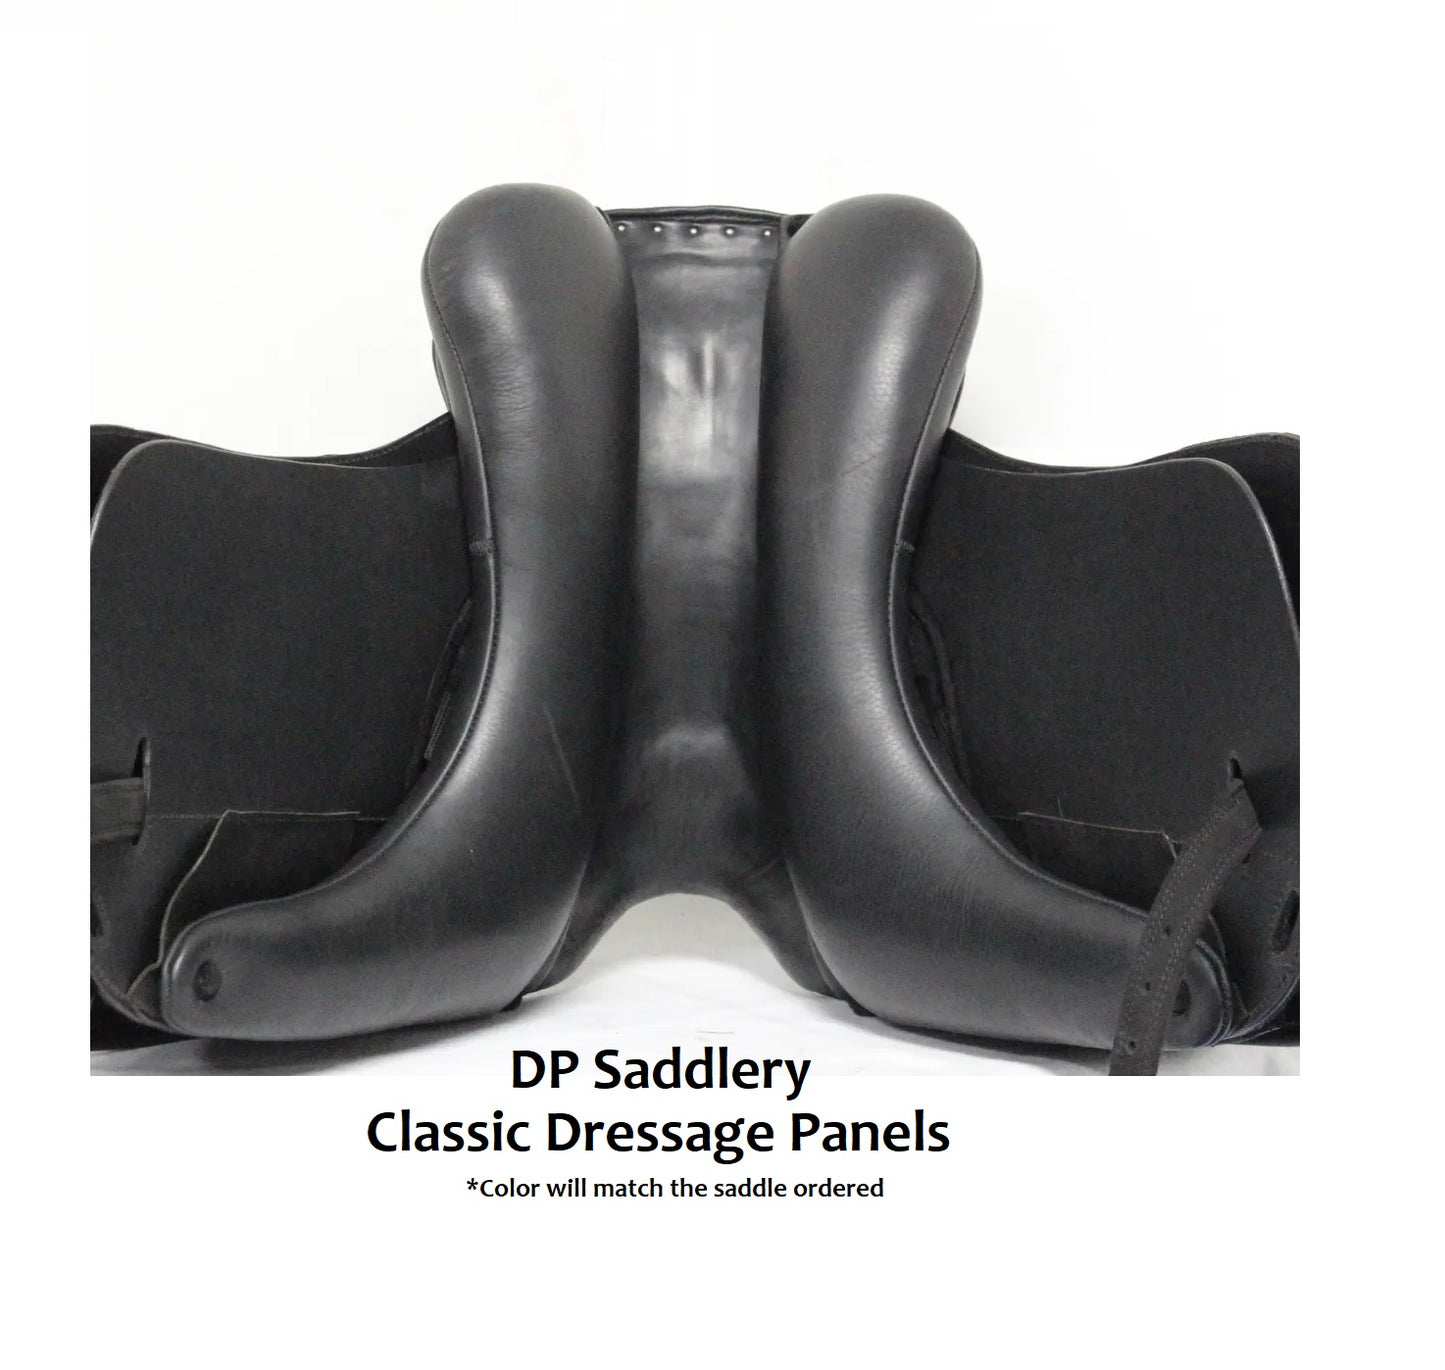 DP Saddlery Classic Dressage 6325 17.5 in